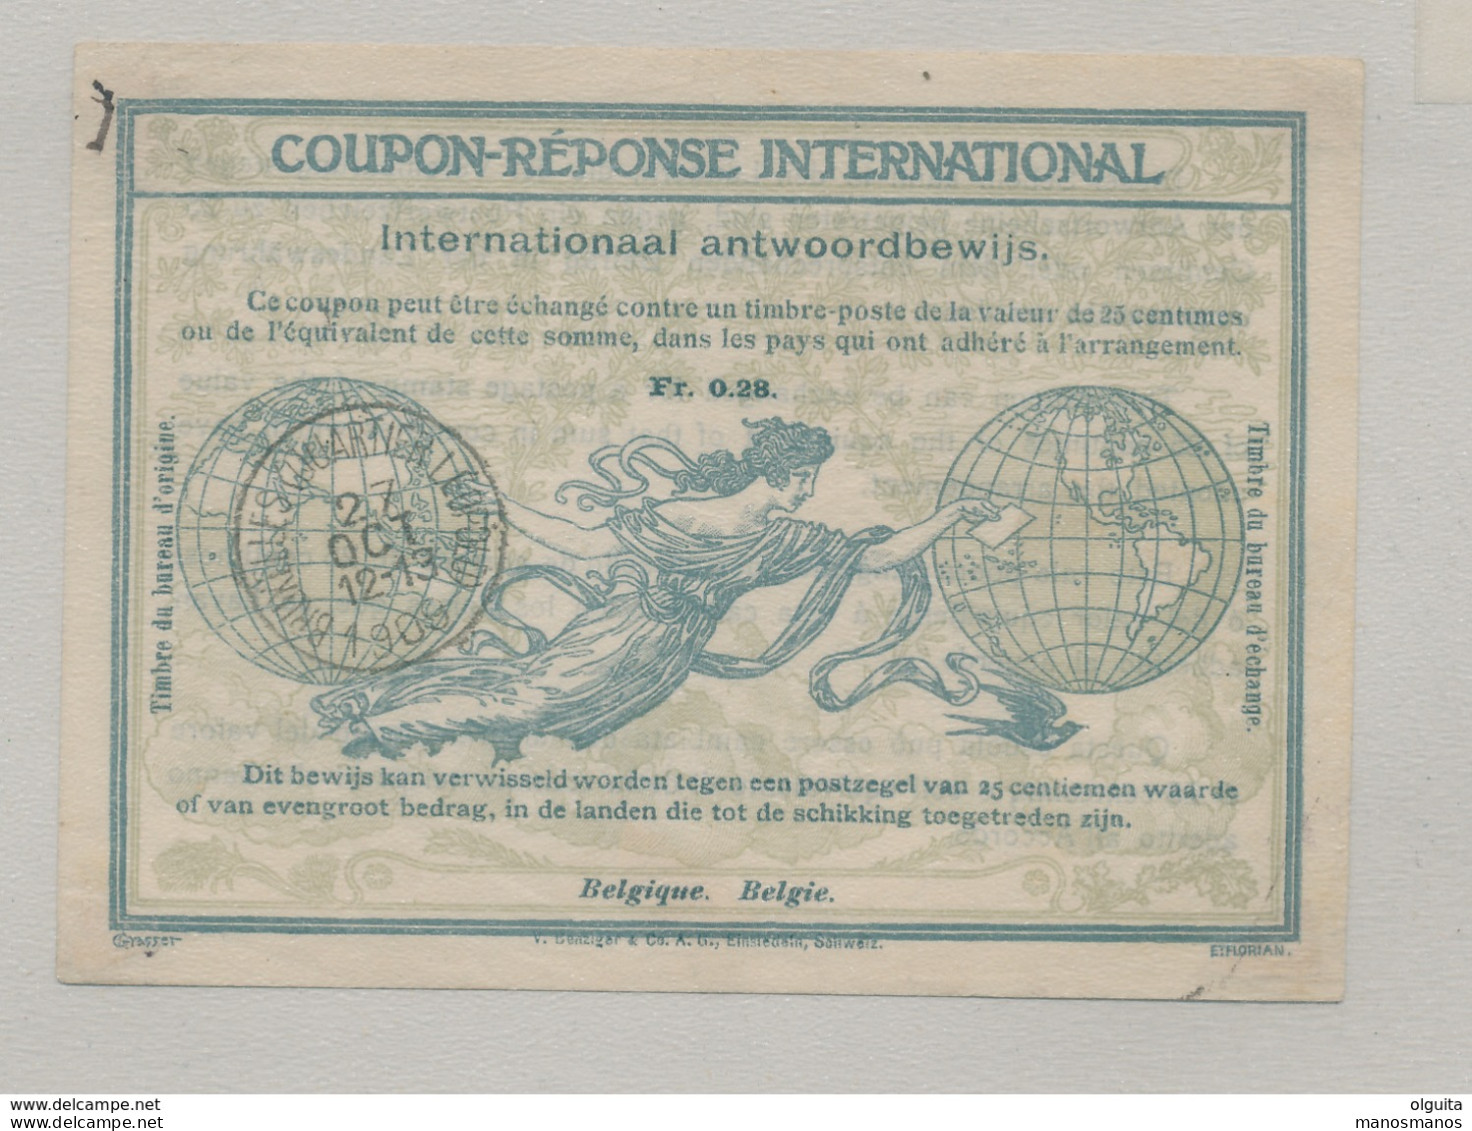 26/441 - COUPON-REPONSE International BRUXELLES Quartier Léopold 1909 - Internationale Antwoordcoupons